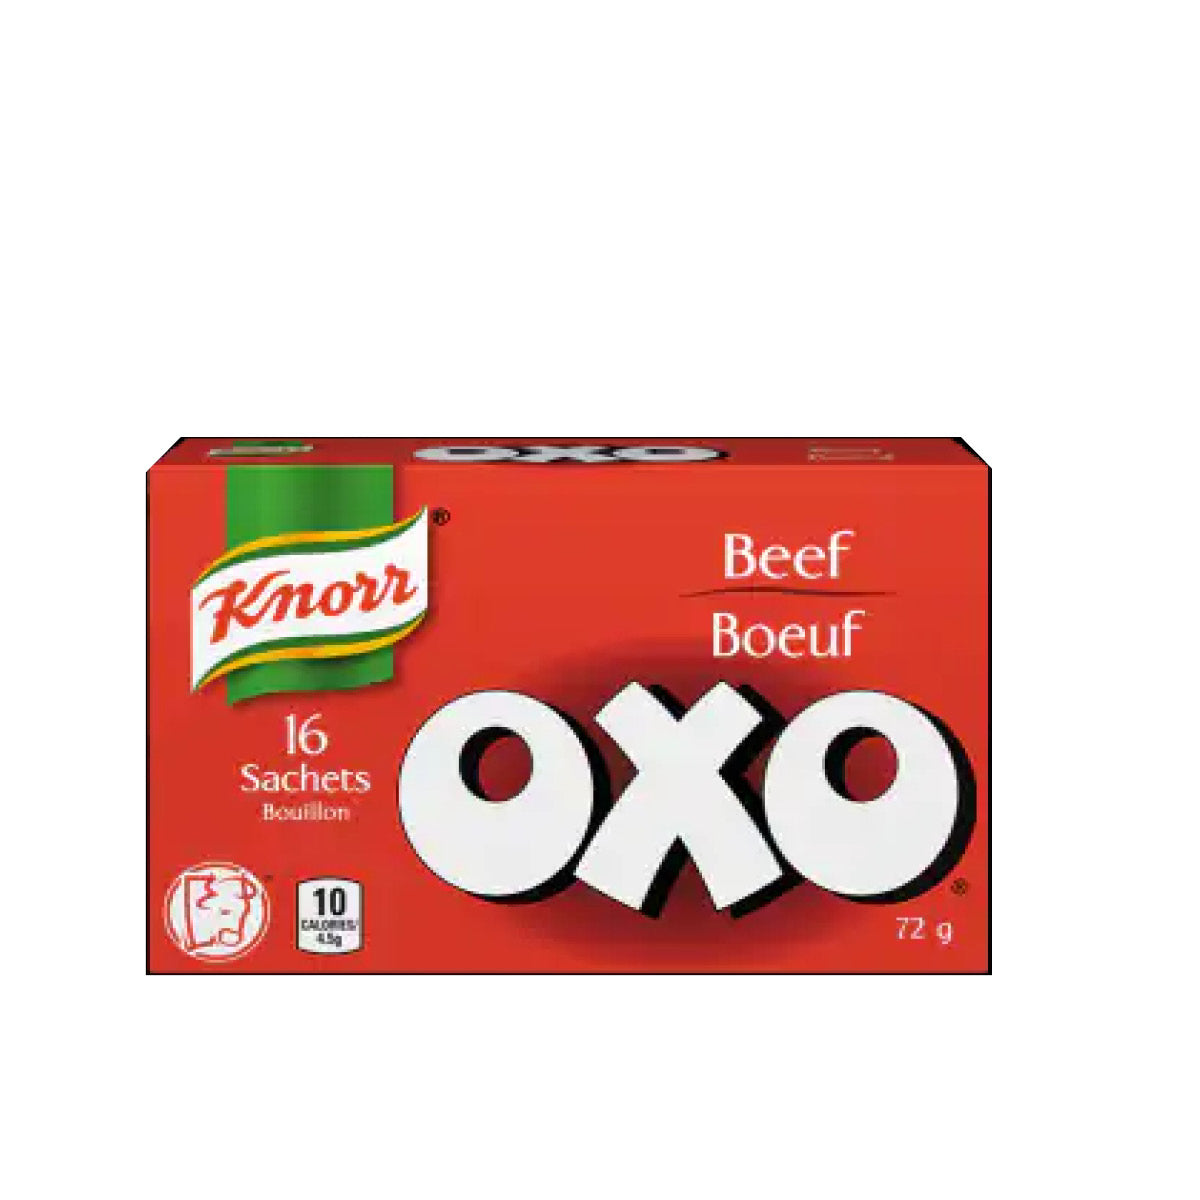 Knorr OXO Sachets Beef, 72g